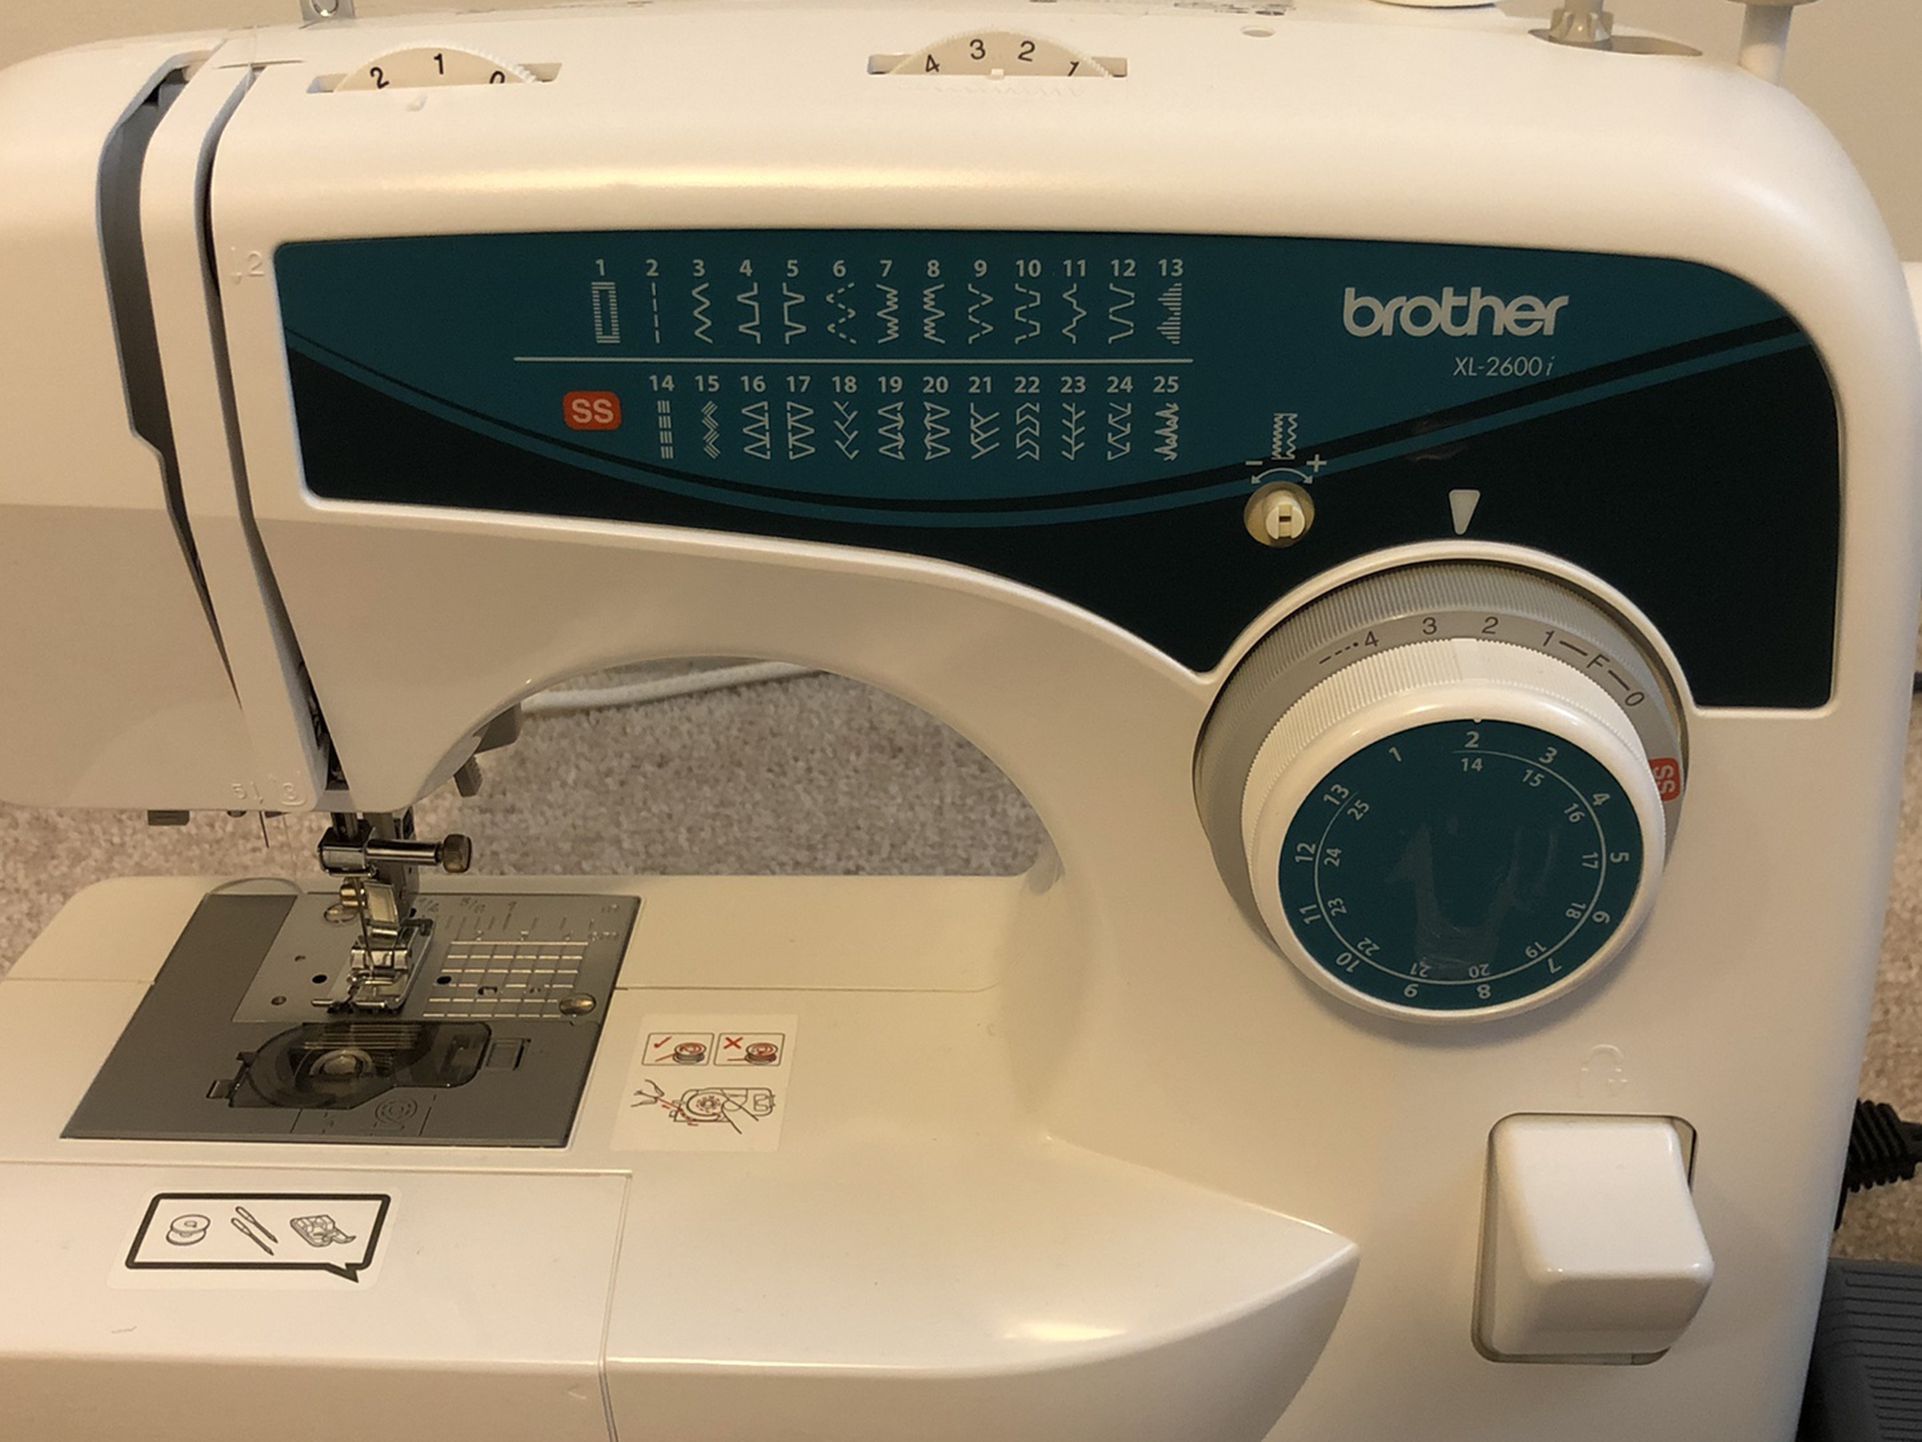 Sewing machine Brother XL-2600i